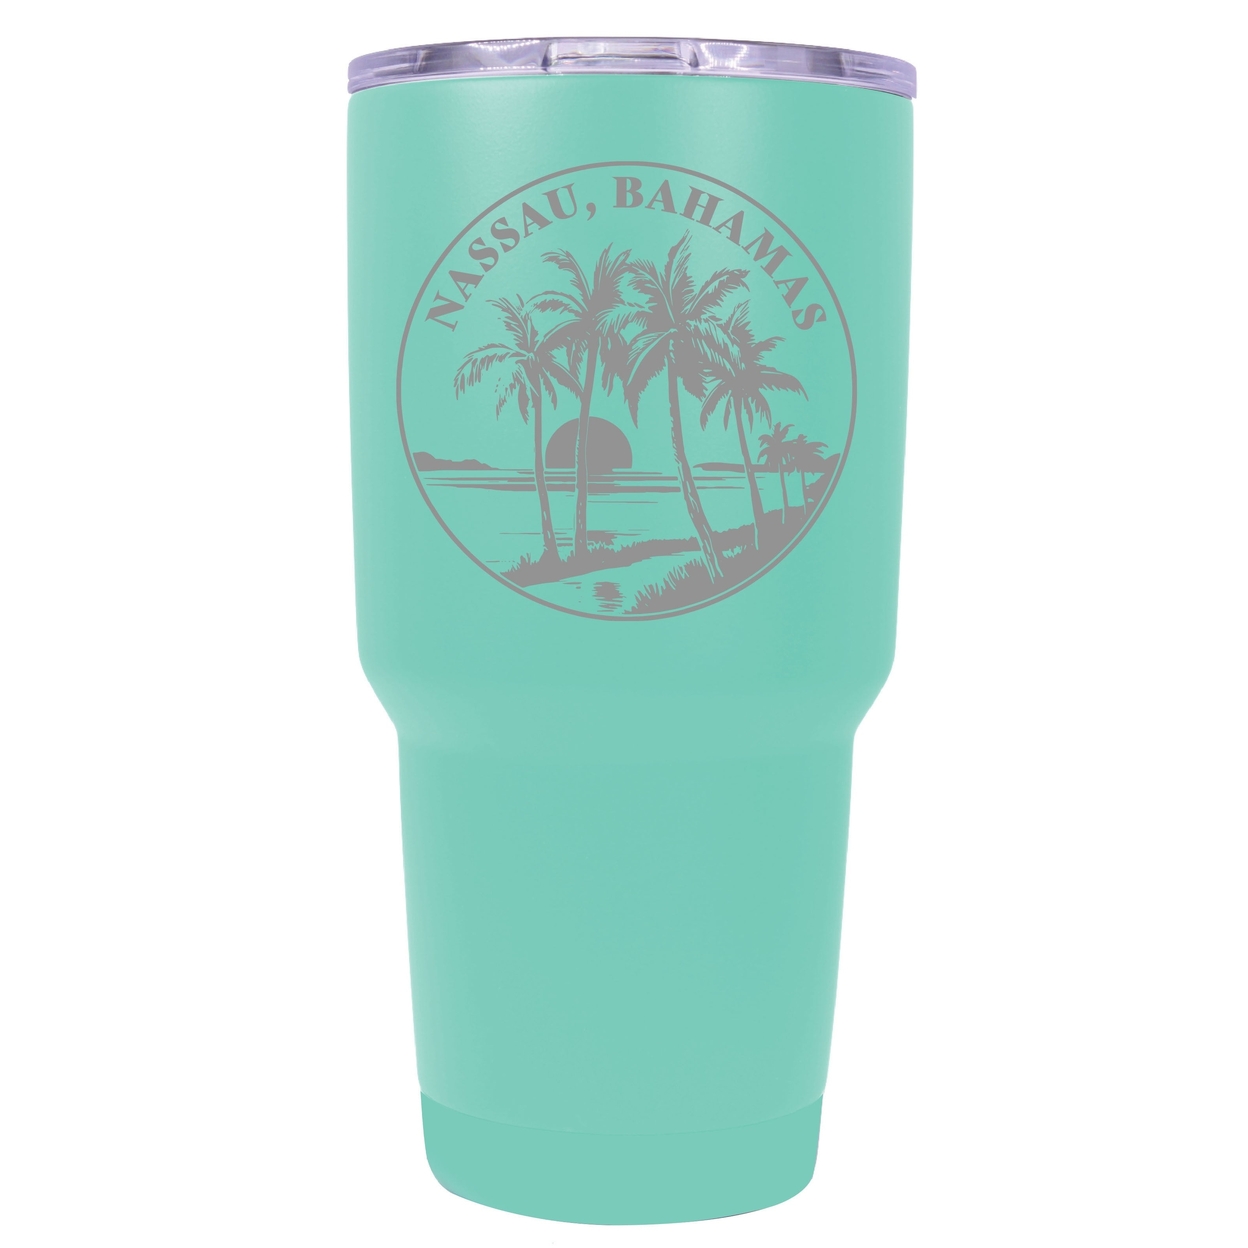 Nassau The Bahamas Souvenir 24 Oz Engraved Insulated Stainless Steel Tumbler - Rose Gold,,4-Pack